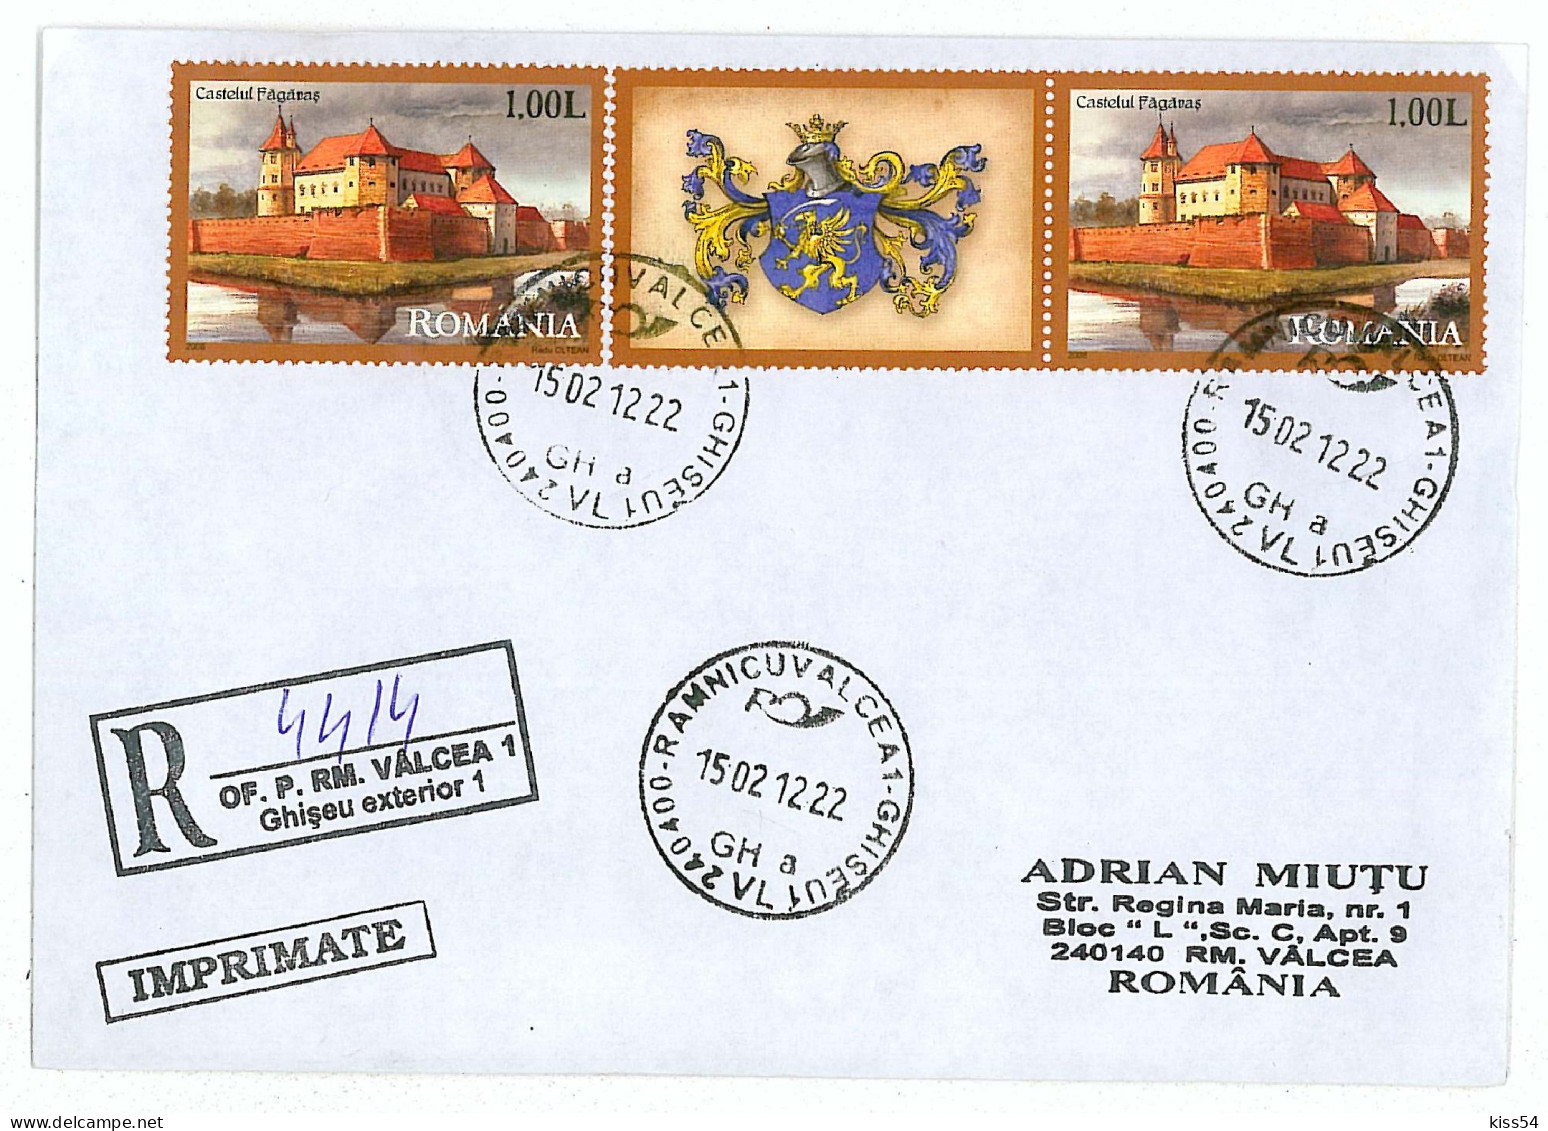 CP 21 - 4414-a Castle FAGARAS, Romania - Registered, Stamps With Vignette - 2012 - Covers & Documents